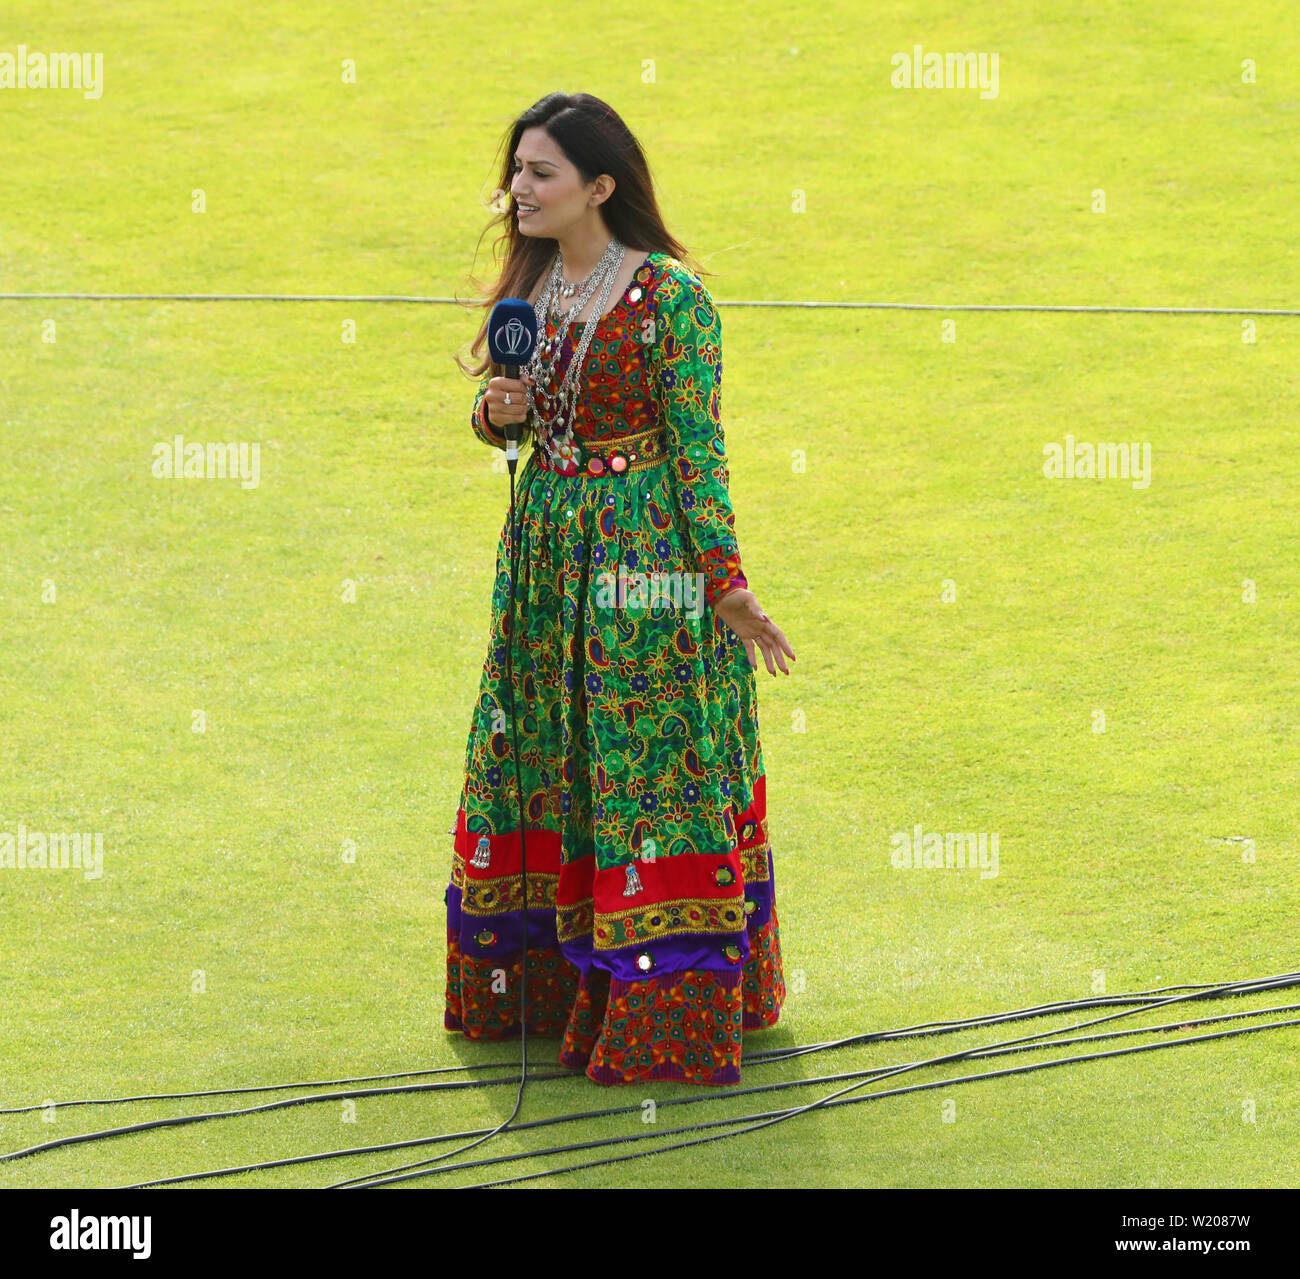 Leeds, UK. 04th July, 2019. An Afghanistan reporter dressed in traditional Afghan dress during the Afghanistan v West Indies, ICC Cricket World Cup match, at Headingley, Leeds, England. Credit: csm/Alamy Live News Stock Photo